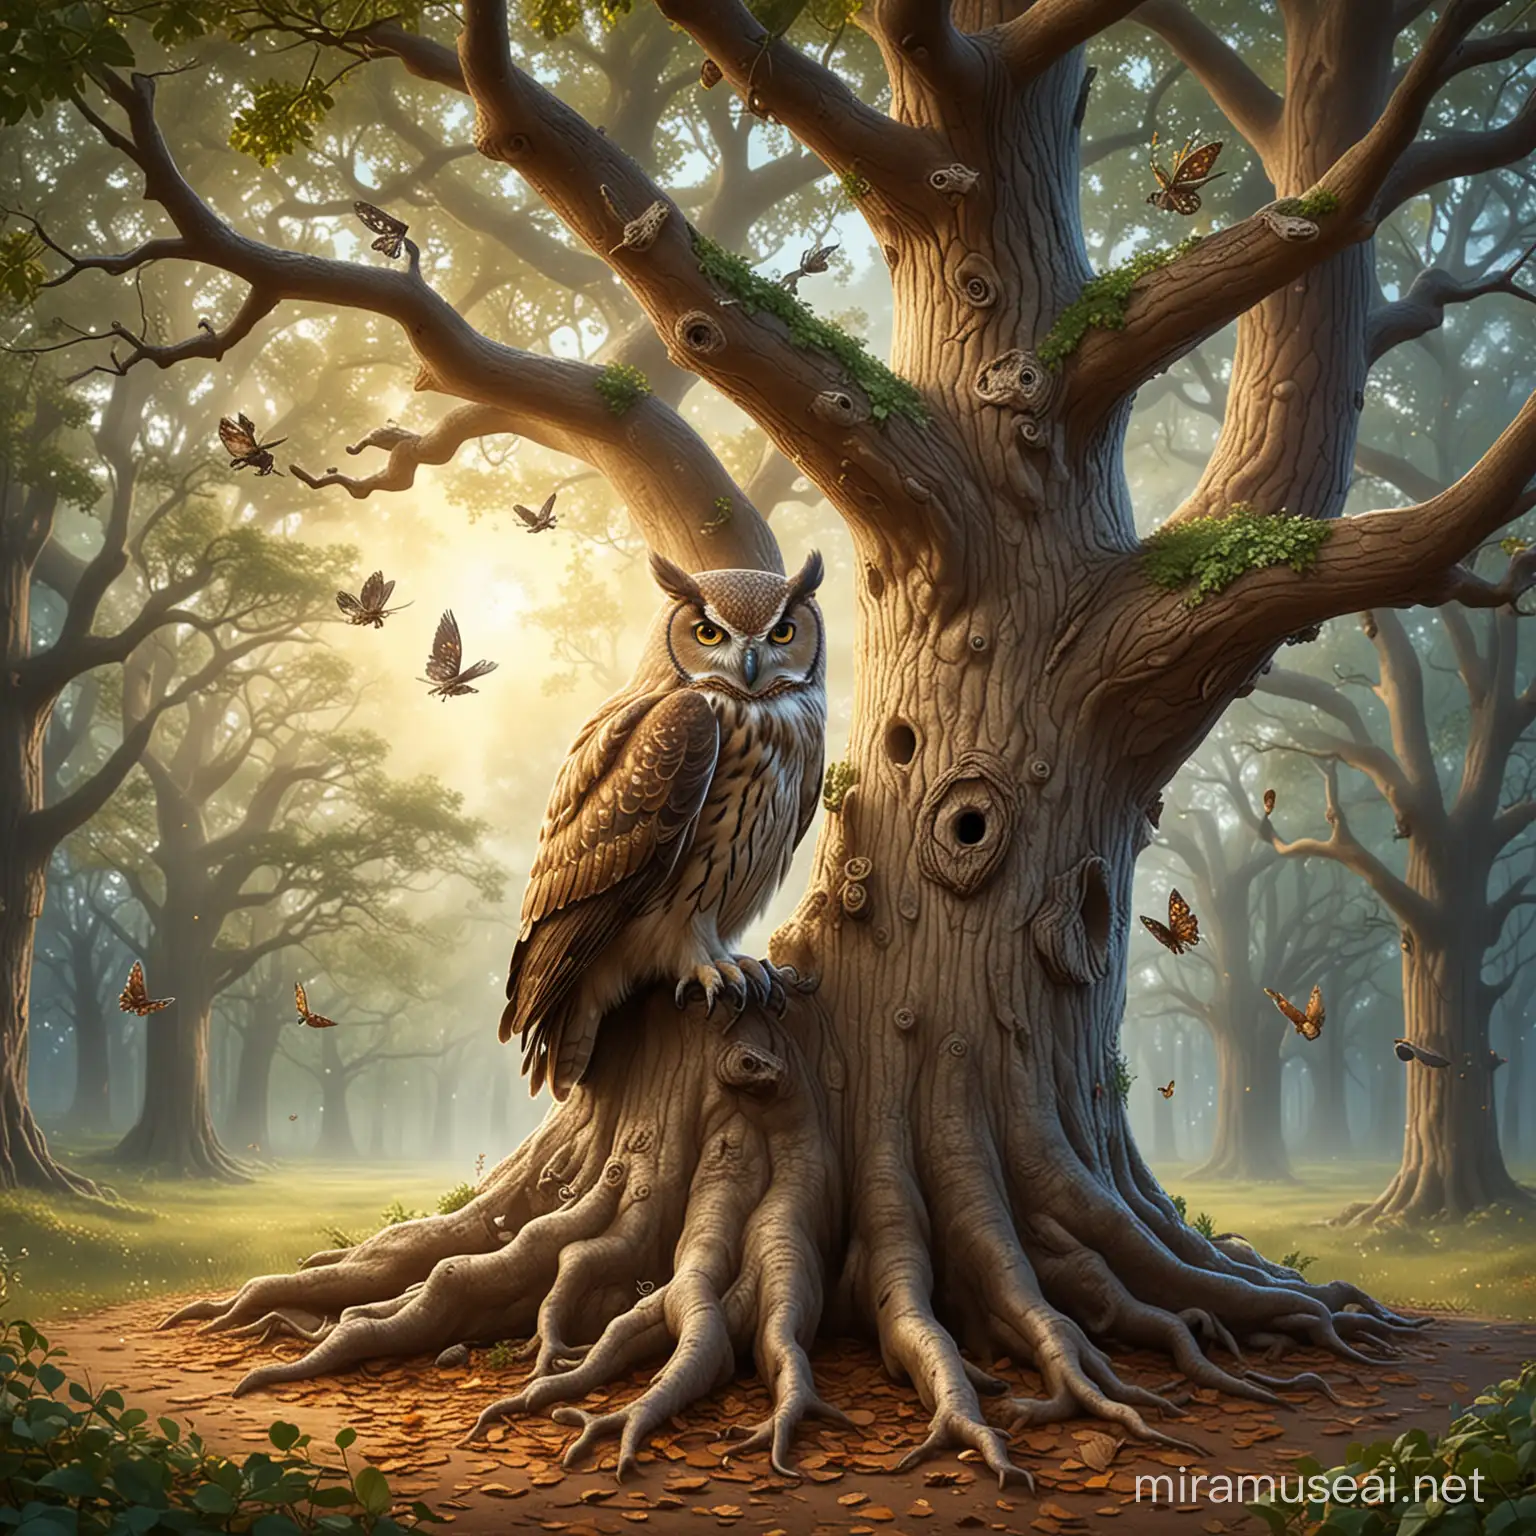 Enchanted Oak Tree with Wise Owl for Childrens Book